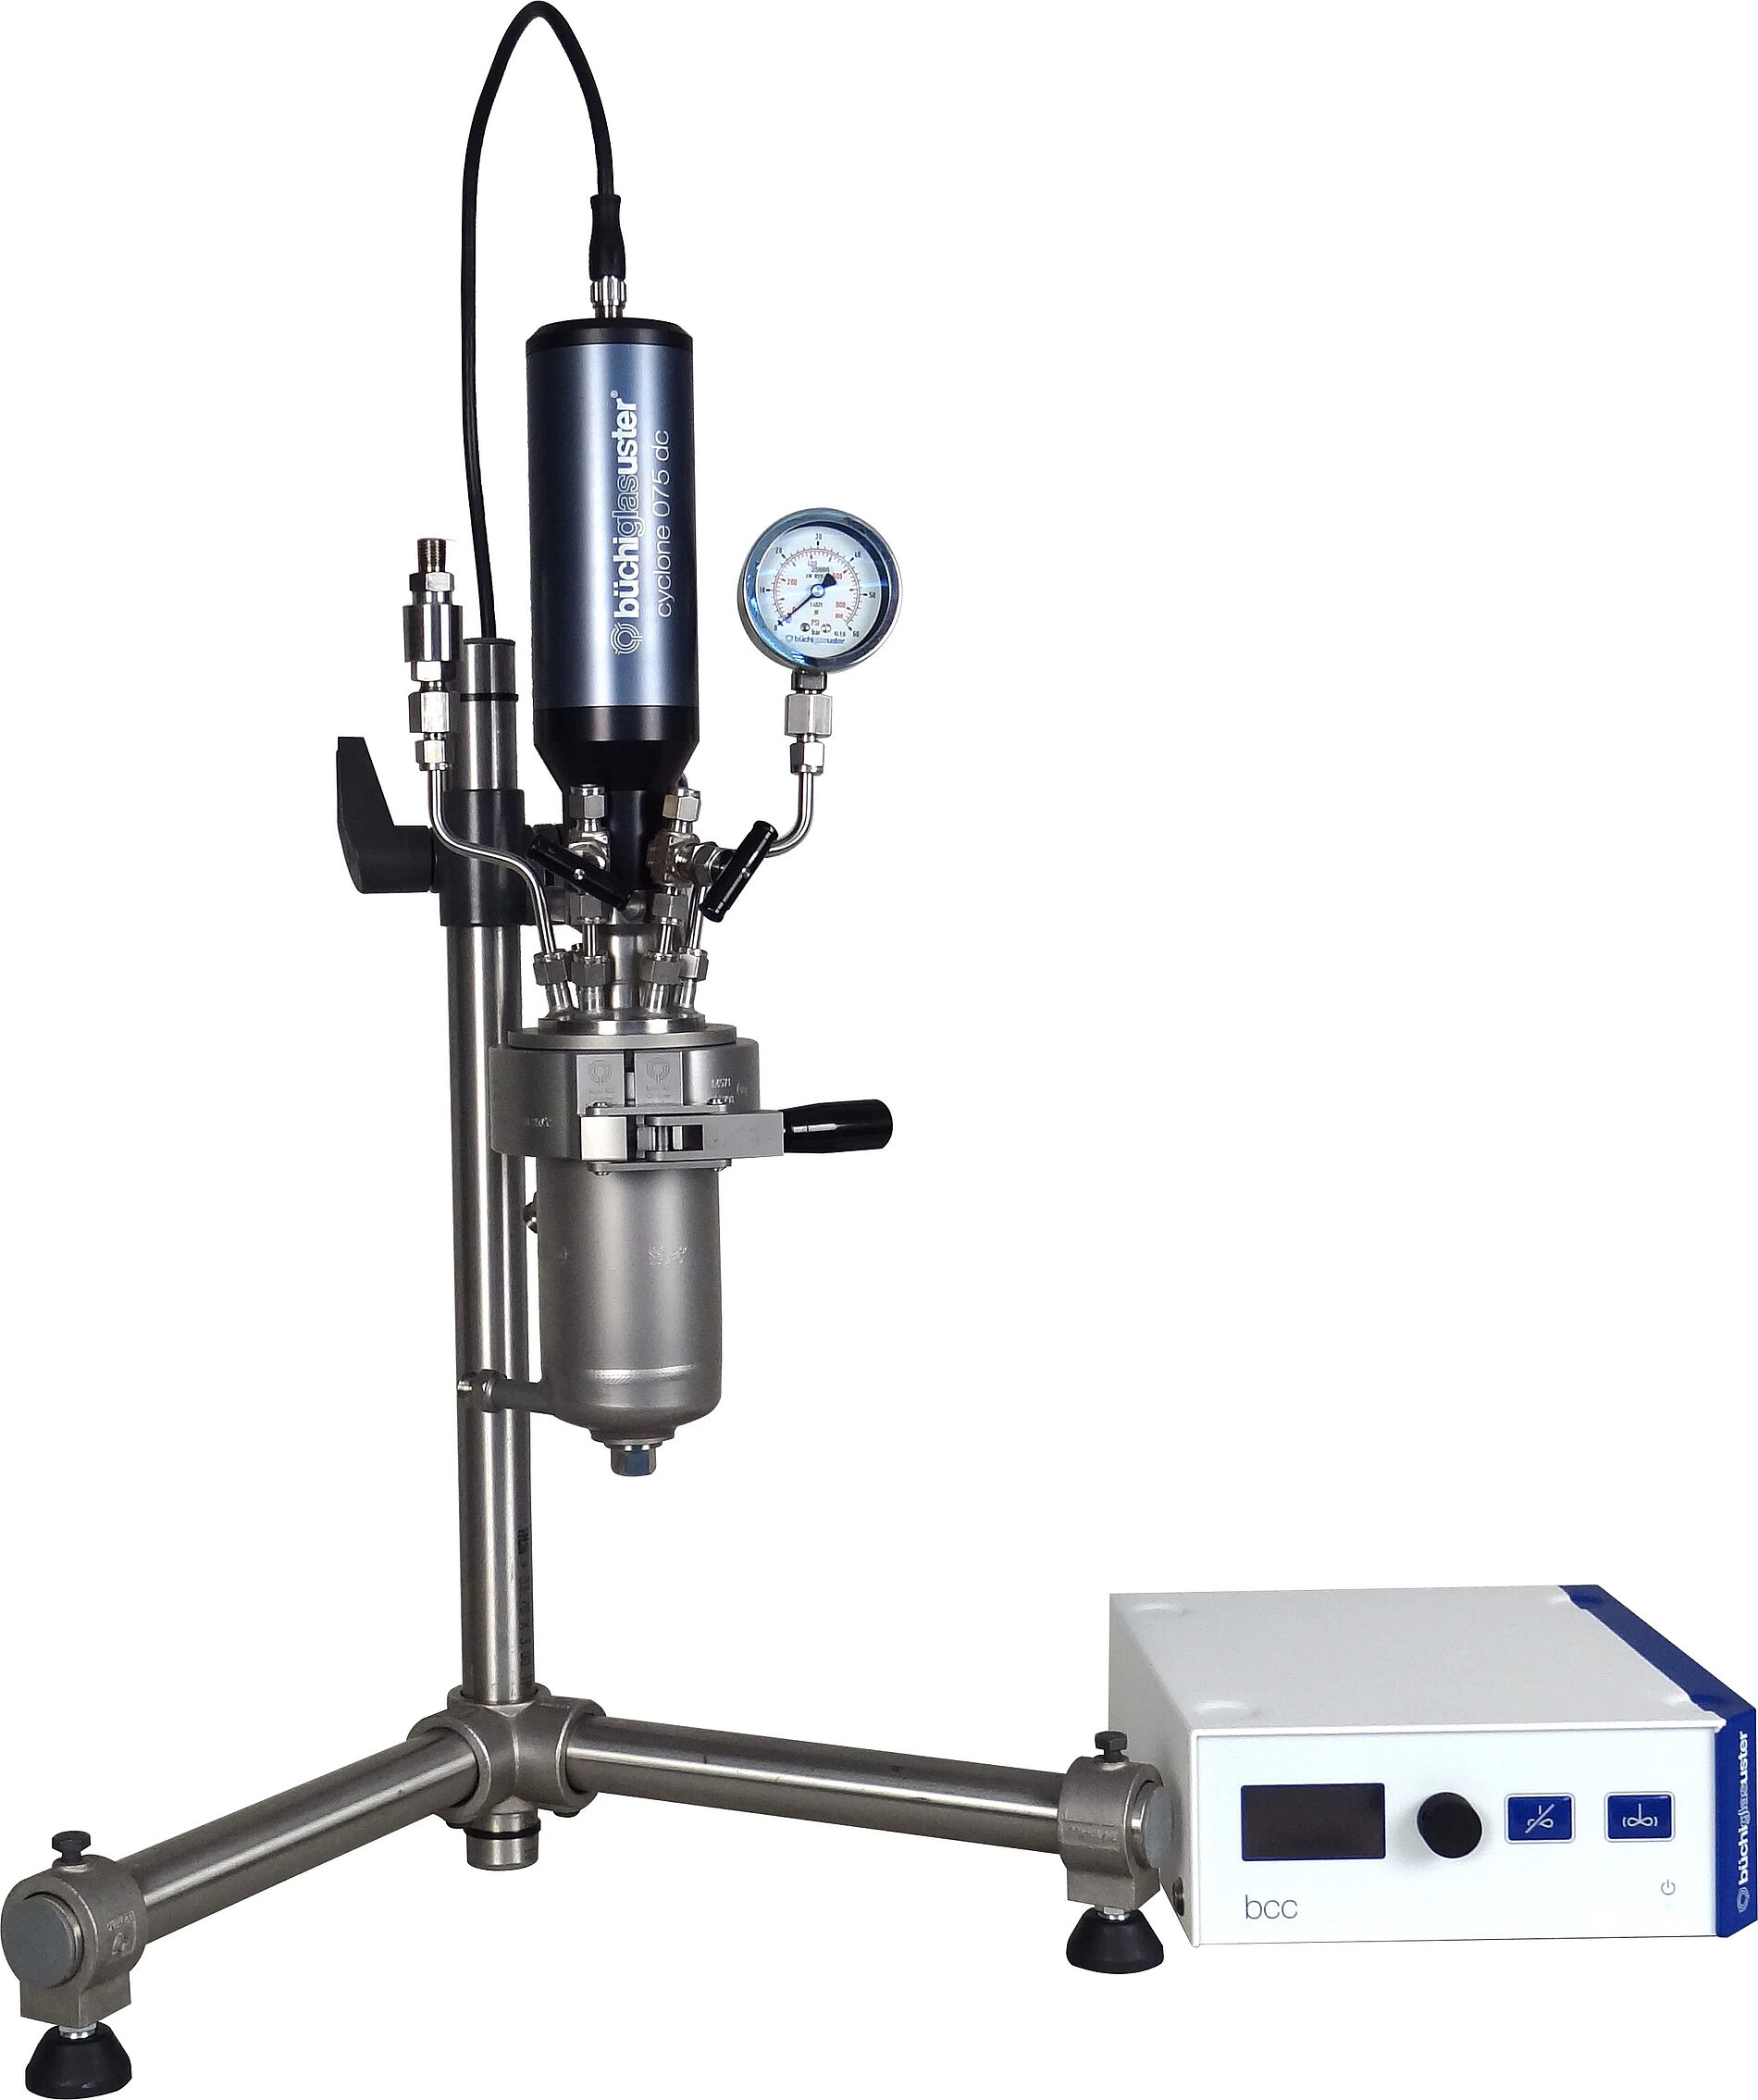 miniclave drive chemical lab pressure reactor